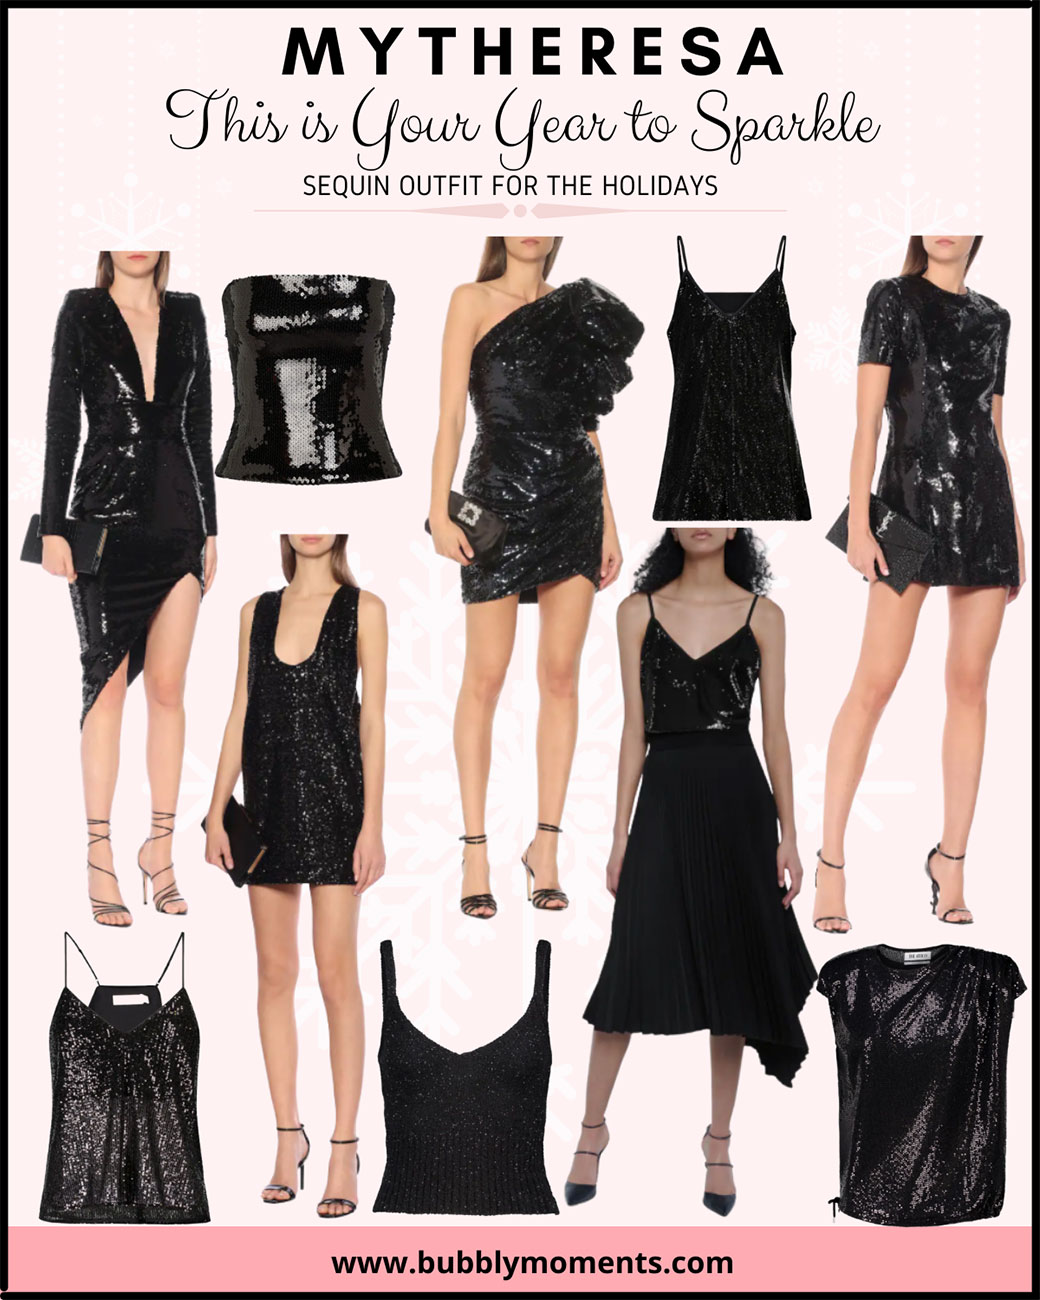 party outfits | Christmas dresses | christmas outfits | holiday outfits | Holiday Outfit ideas | new years eve outfit ideas | new years eve dress | asymmetric dress | luxury clothes | elegant party outfits | black dresses | holiday party dress | sexy outfits | sexy dresses | mini dresses | sequined dress | Bubbly Moments